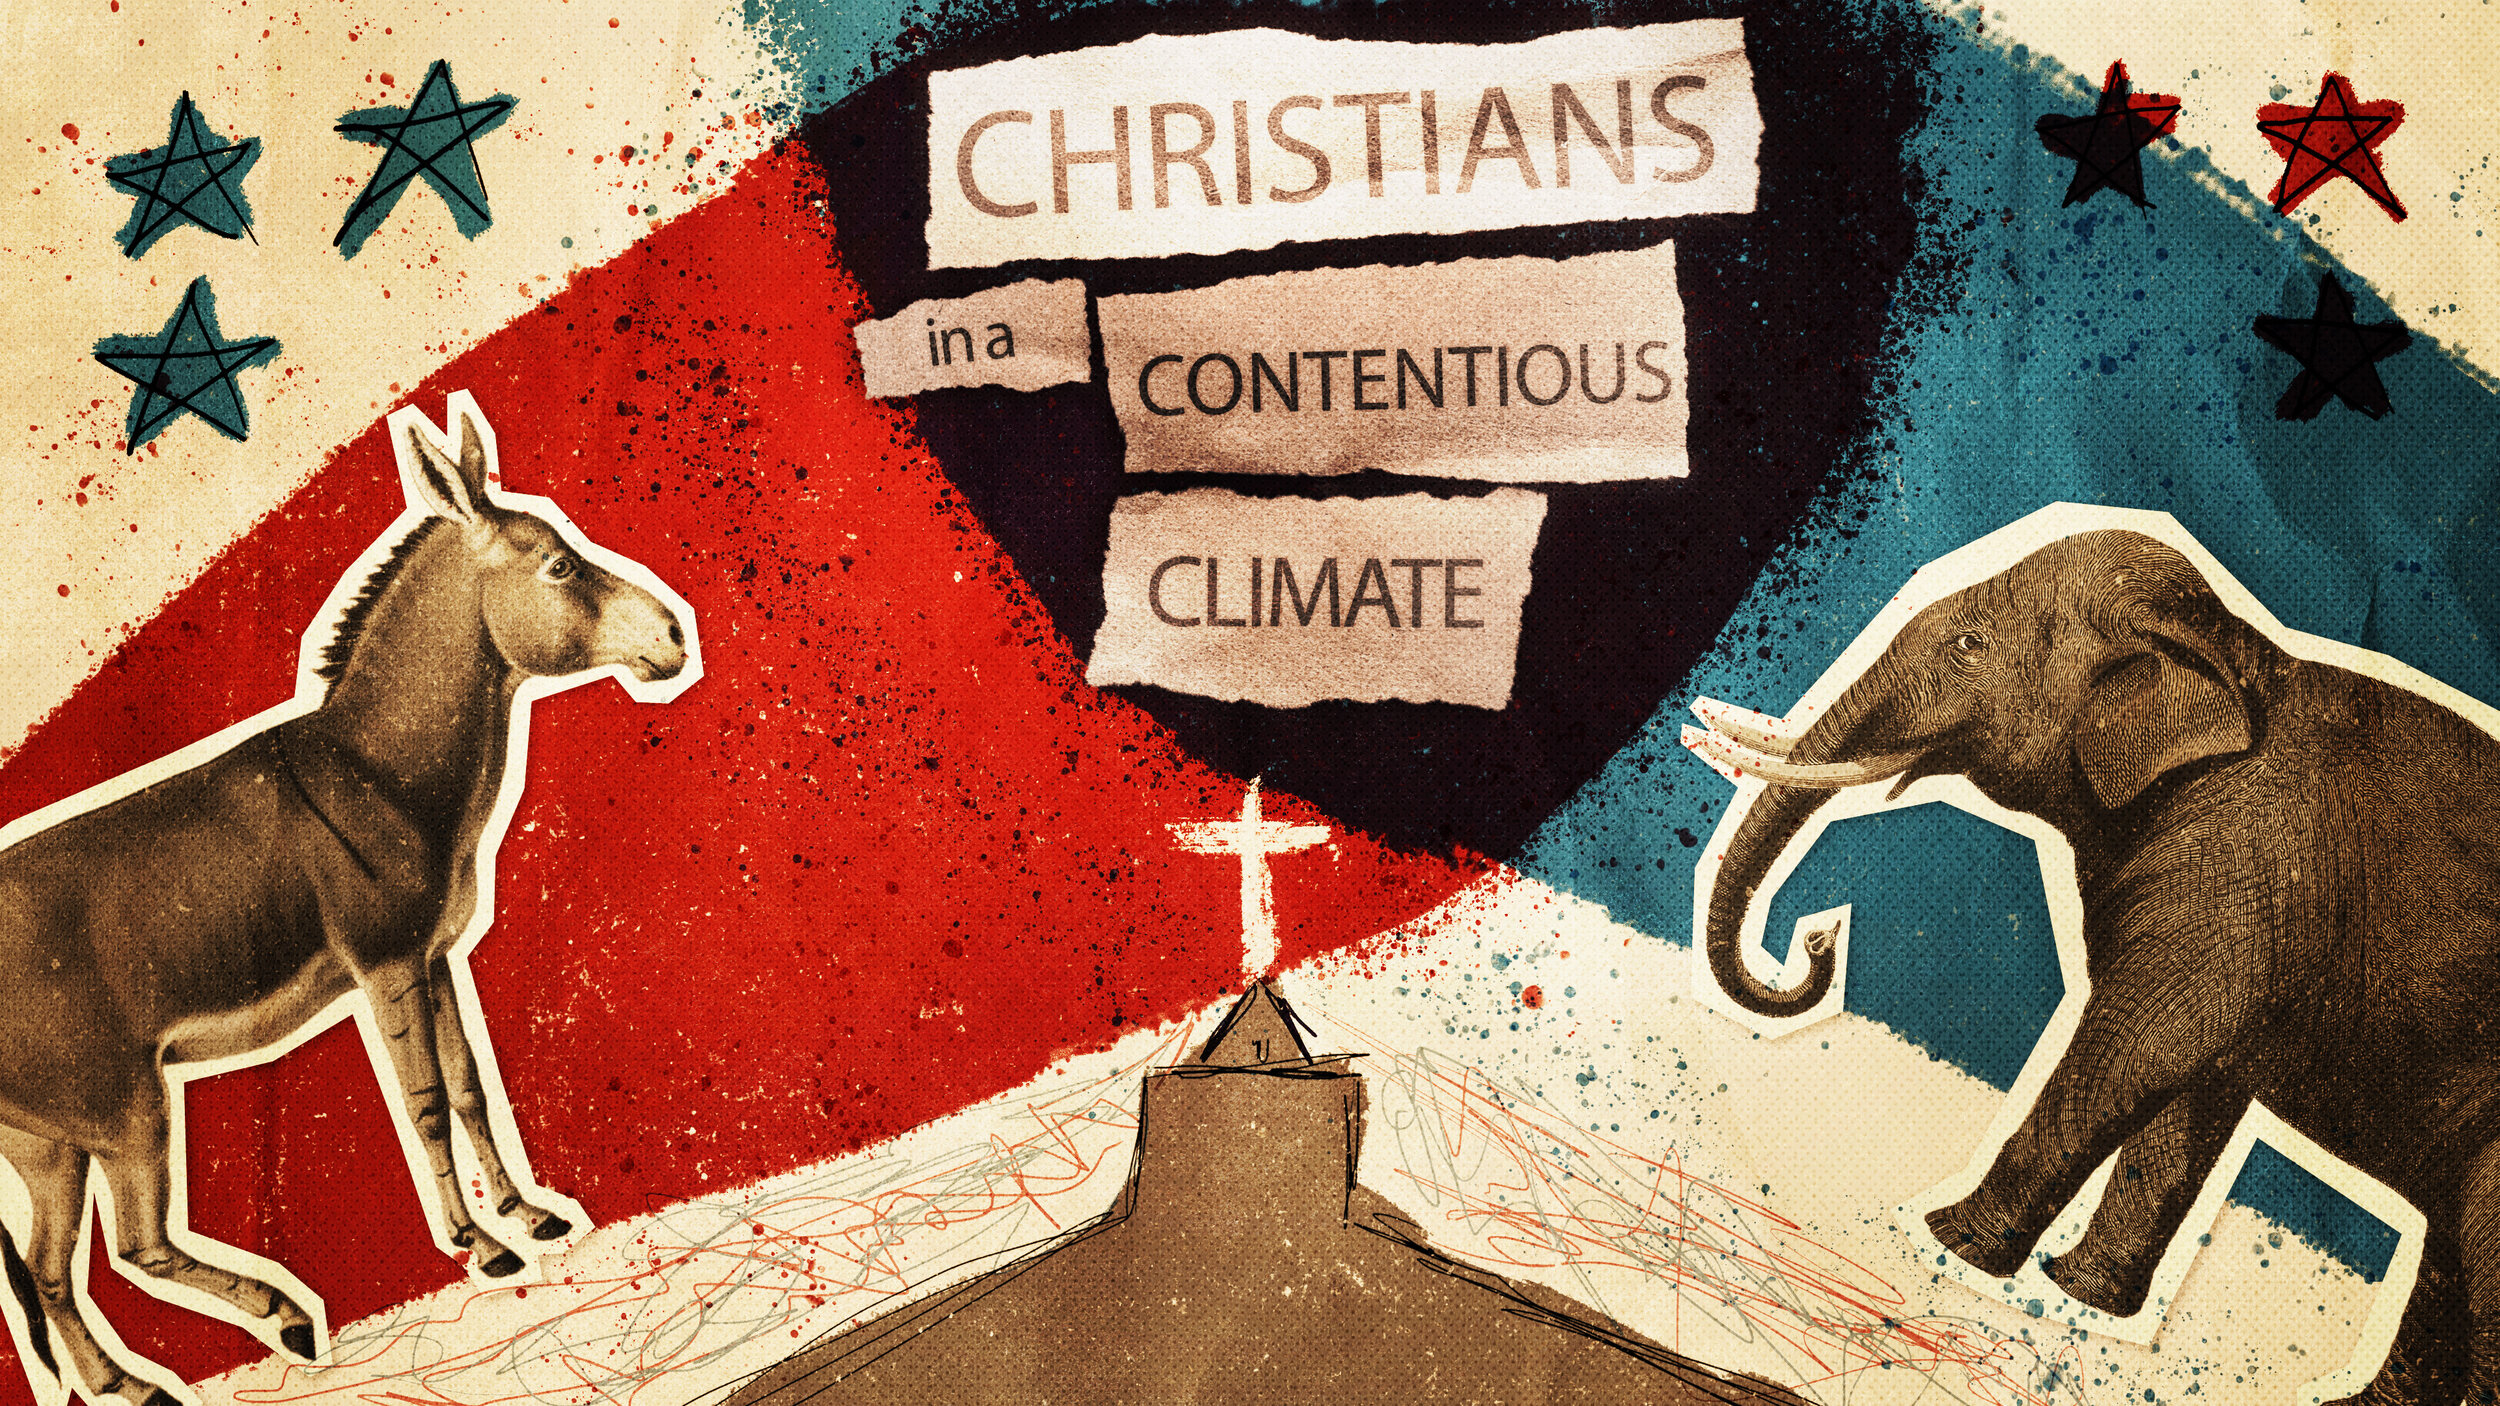 Christians in a Contentious Climate